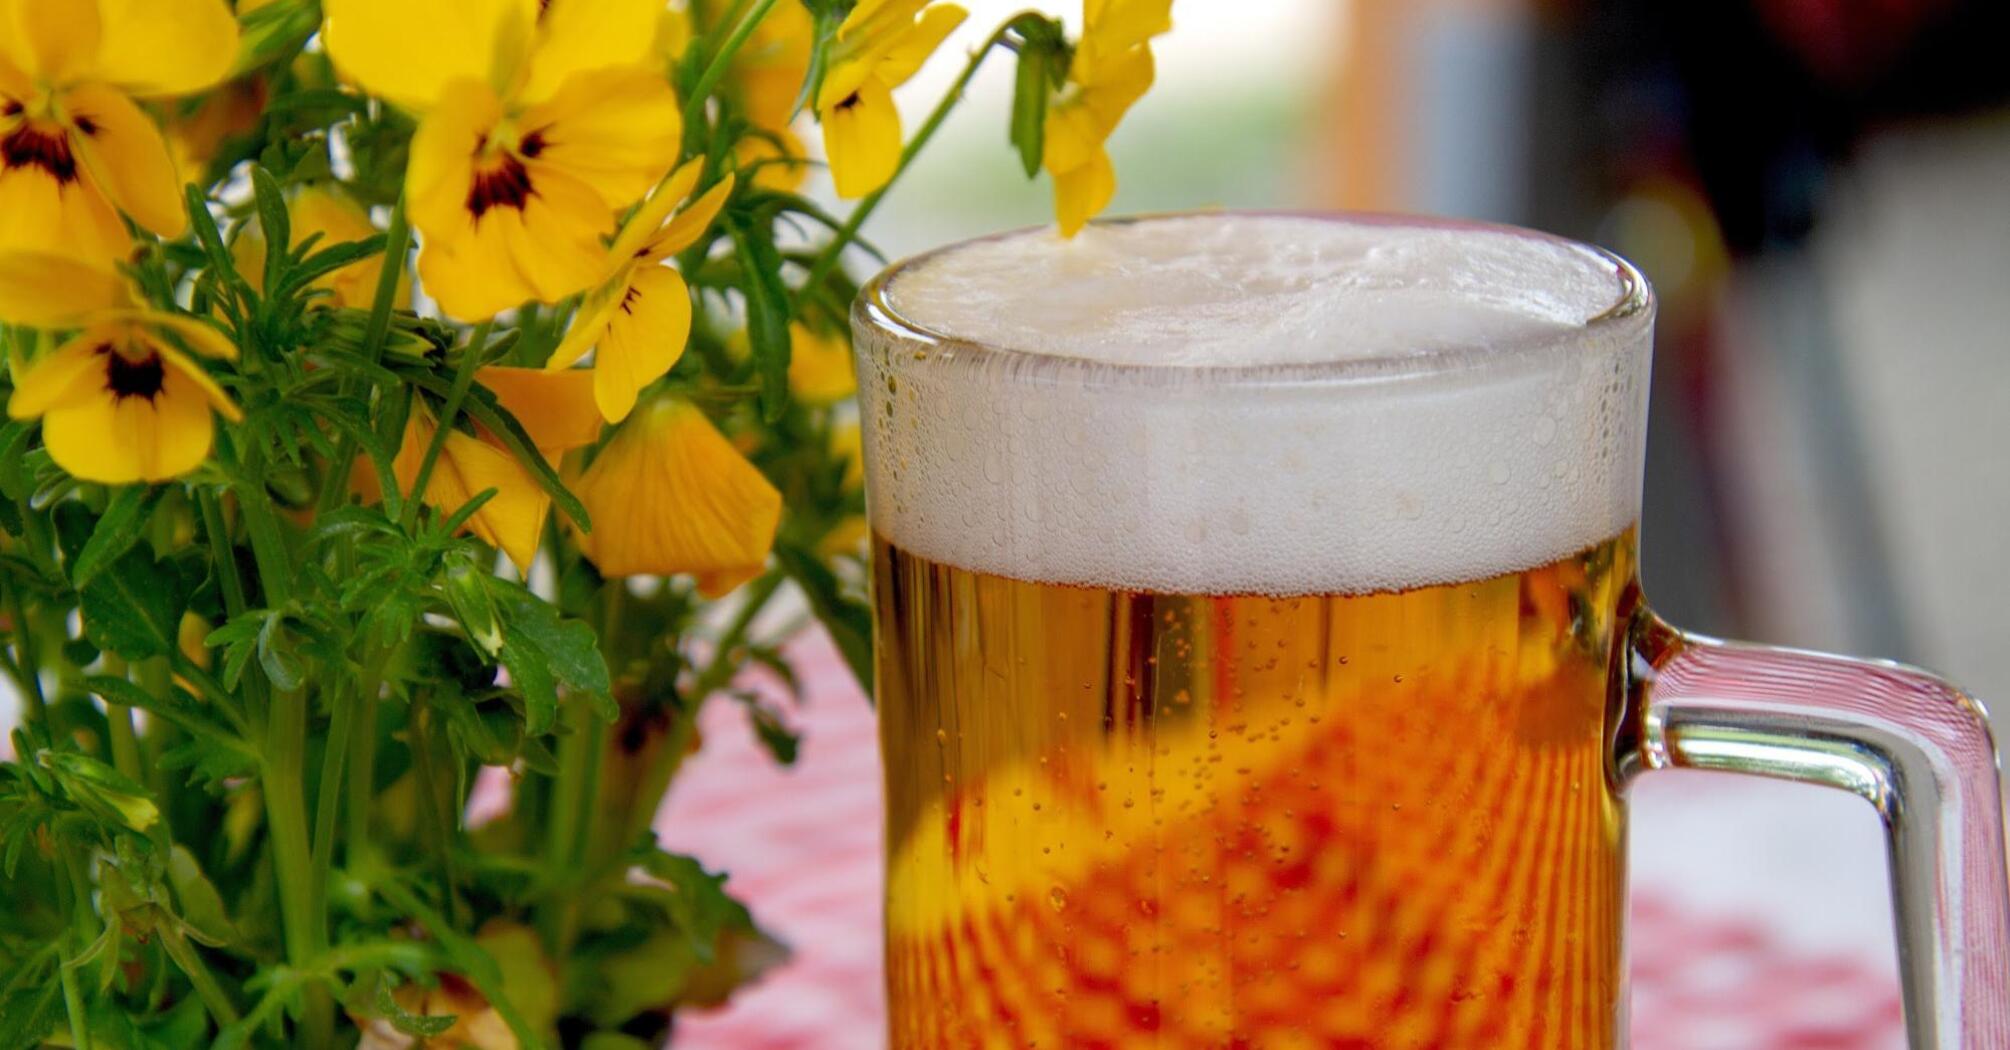 A glass of light beer against a backdrop of bright flowers